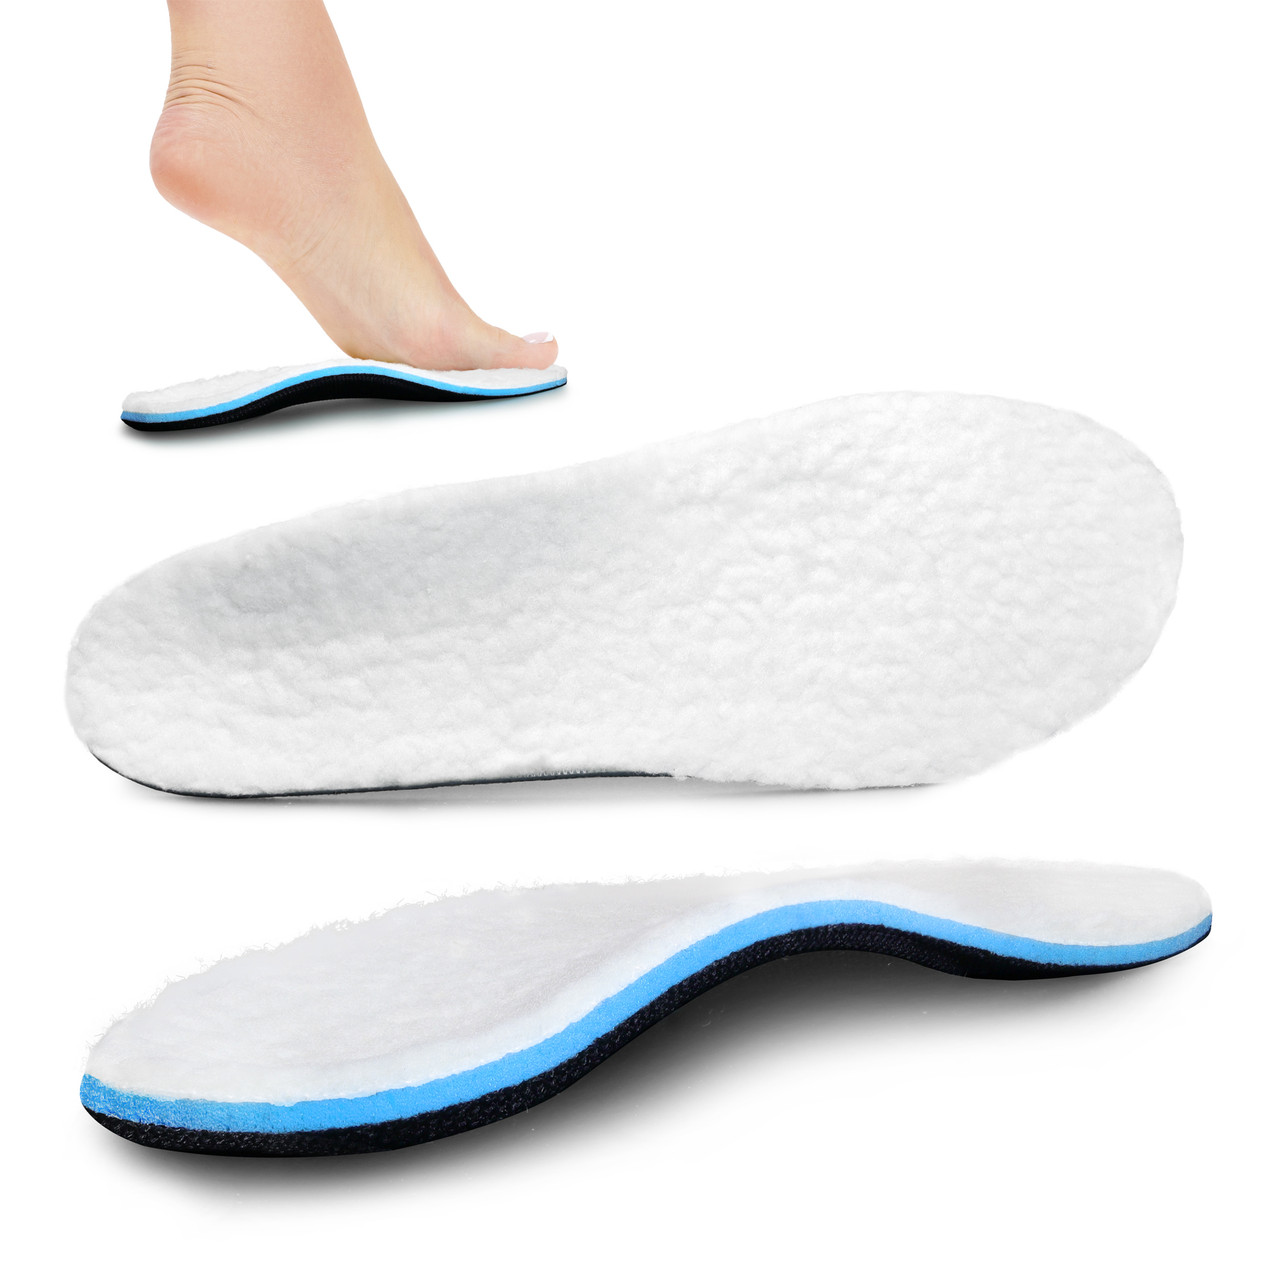 https://cdn11.bigcommerce.com/s-nc8qsb7kb9/images/stencil/1280x1280/products/2964/87118/orthos-shearling-replacement-orthotic-insoles__37286.1699920359.jpg?c=1